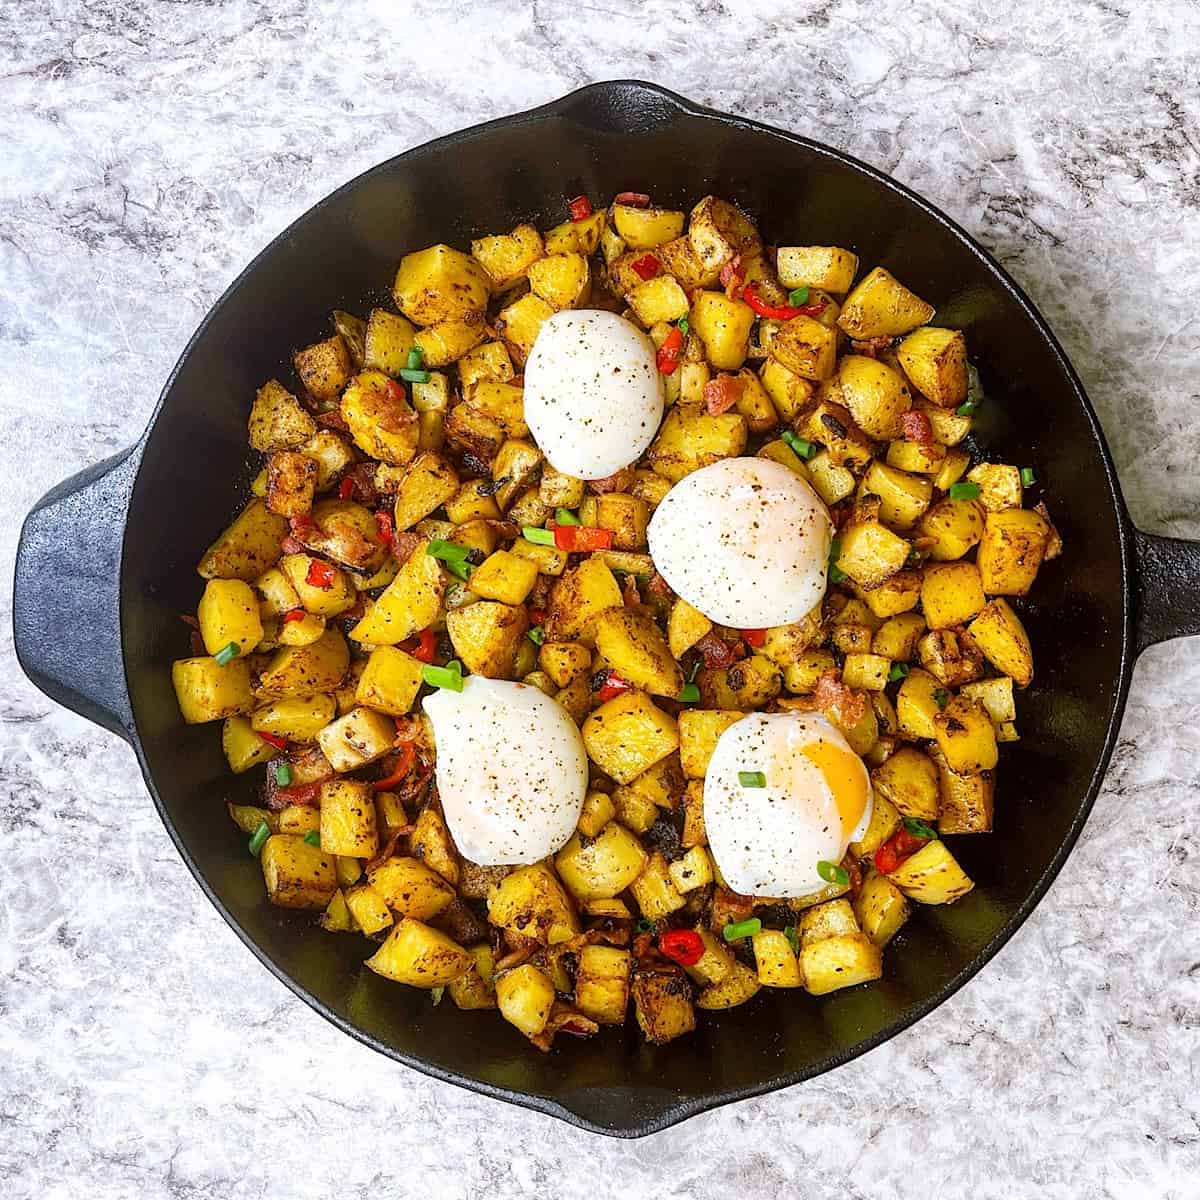 Breakfast potatoes with poached eggs in a cast iron skillet